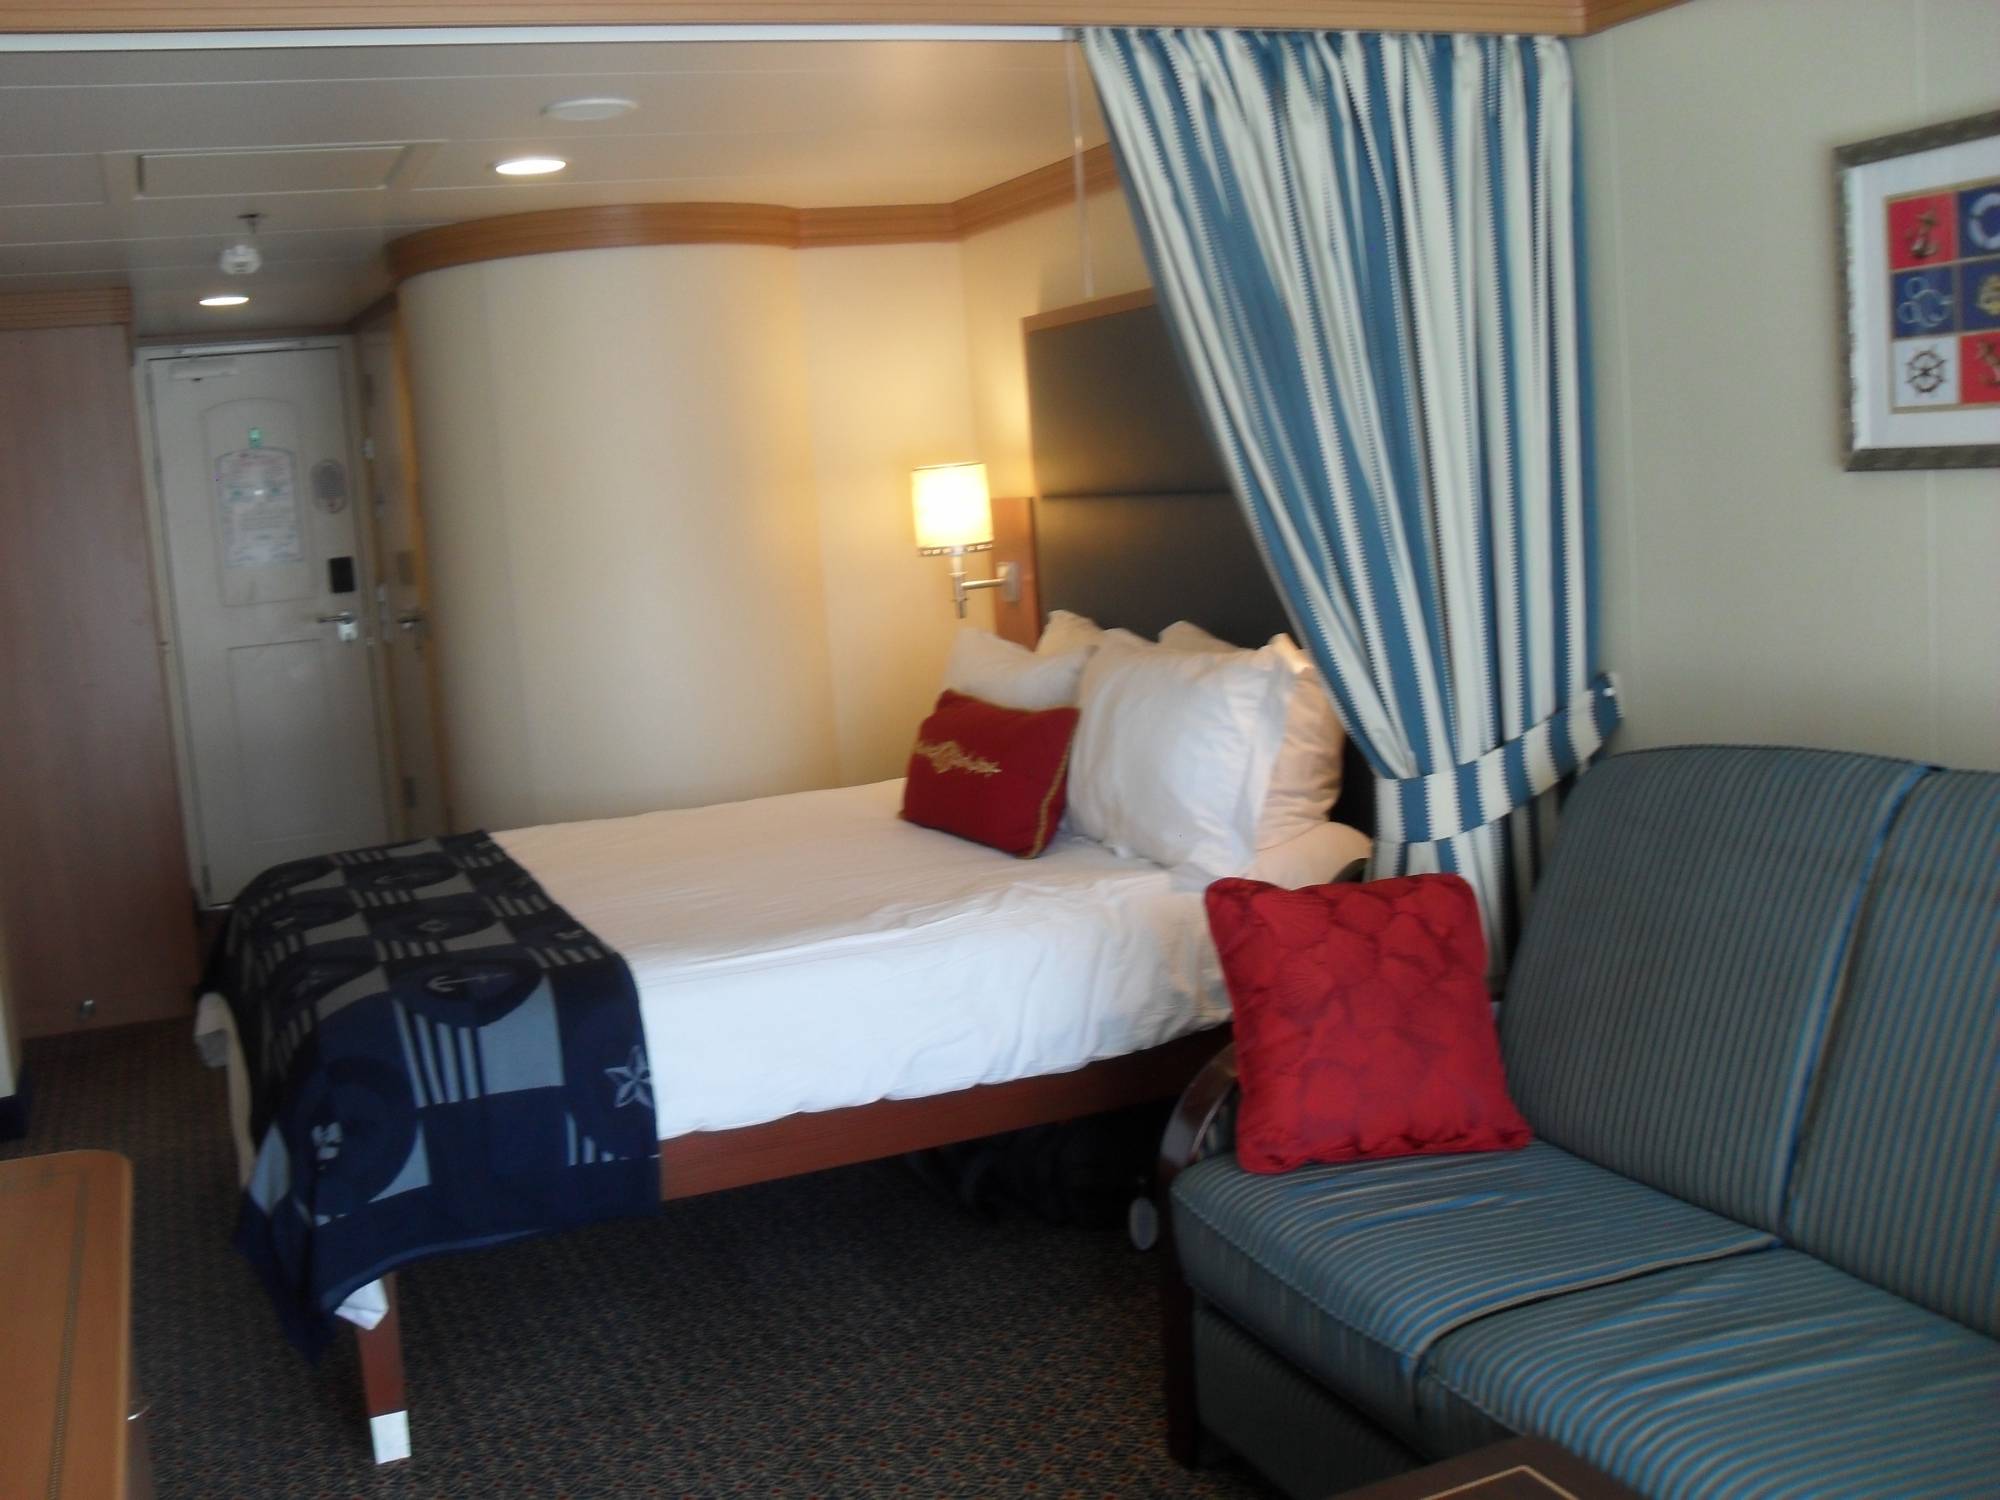 Category 4A Stateroom, 9086